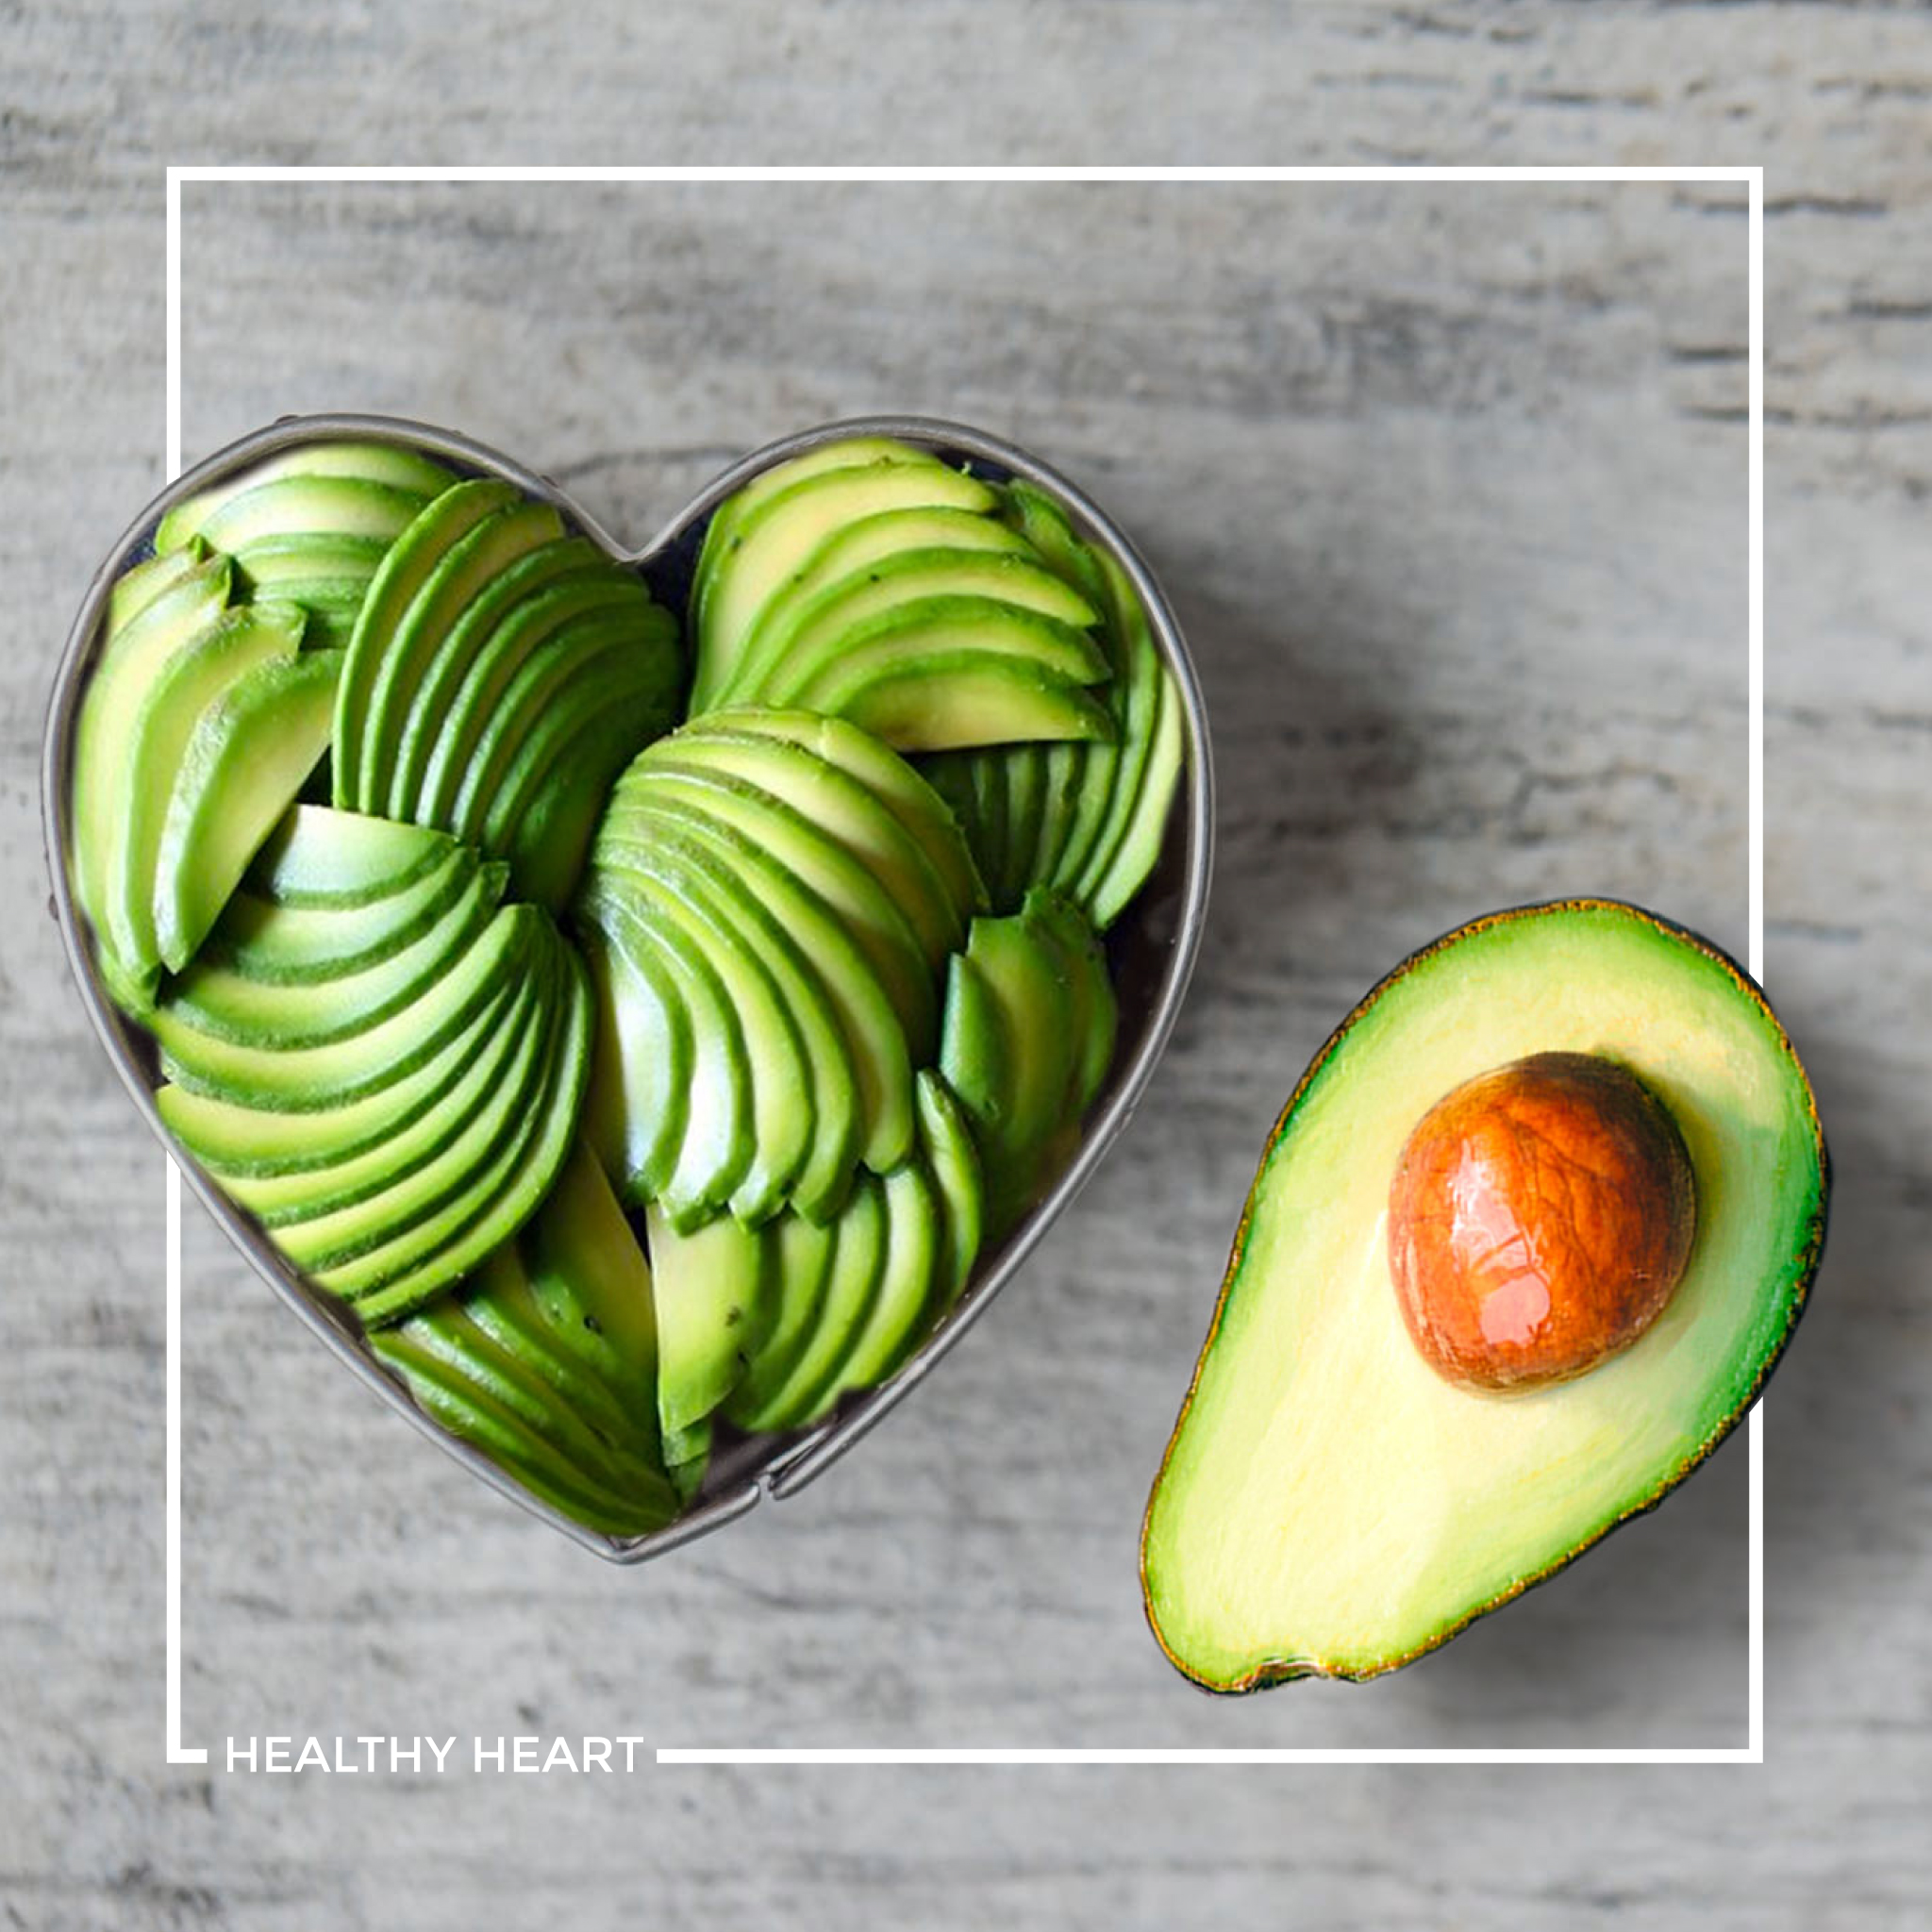 Avocado’s Are Great For Your Heart